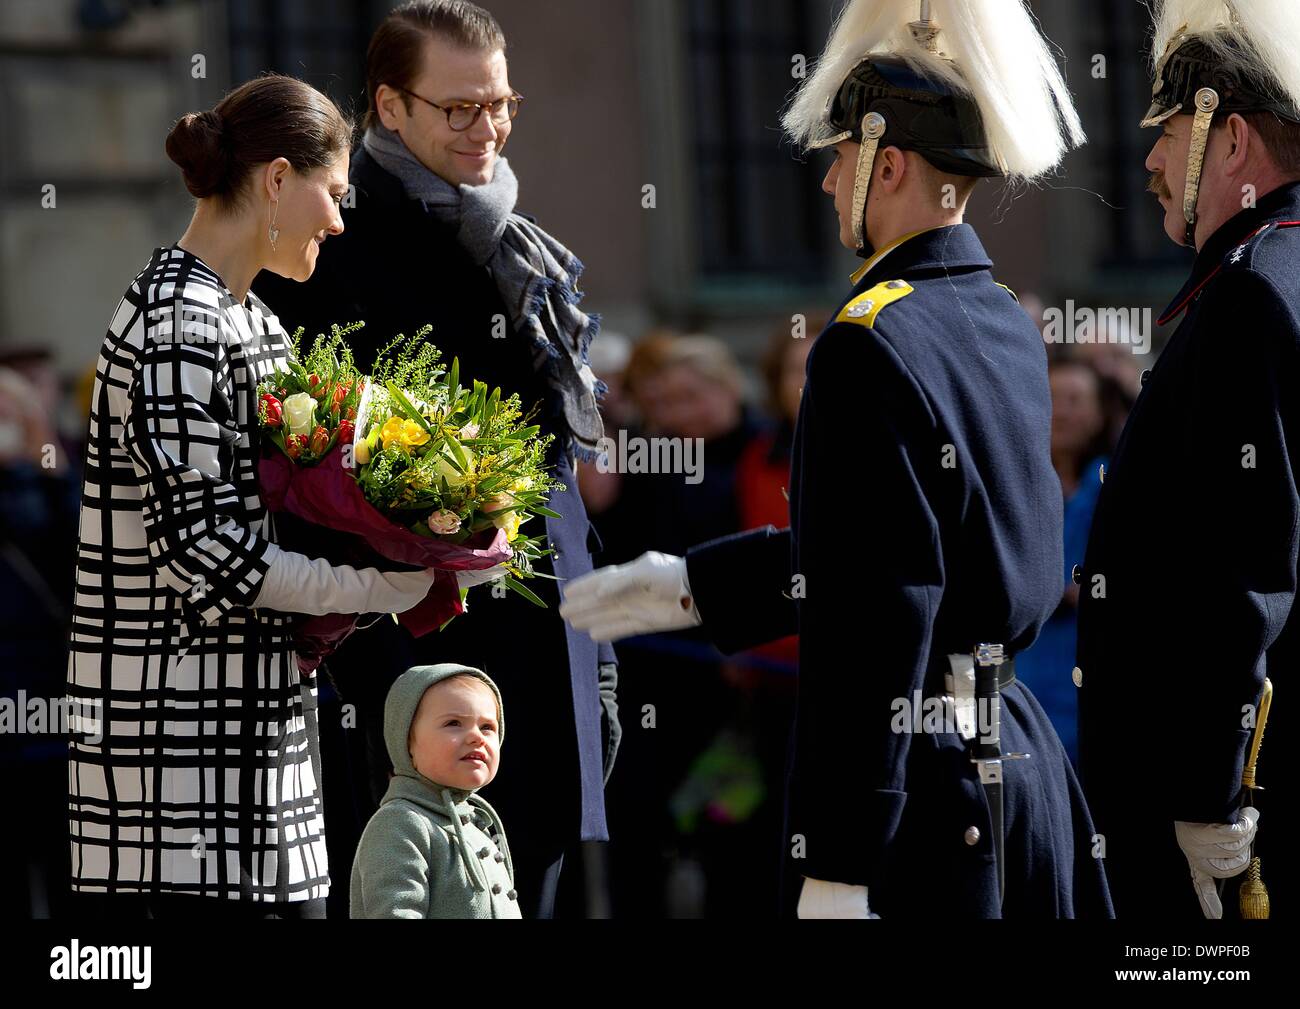 Princess Victoria celebrates her saint's day with Prince Daniel Westling and Princess Estelle at the Royal Palace Square in Stockholm. Photo: RPE/ Albert Nieboer - Stock Photo